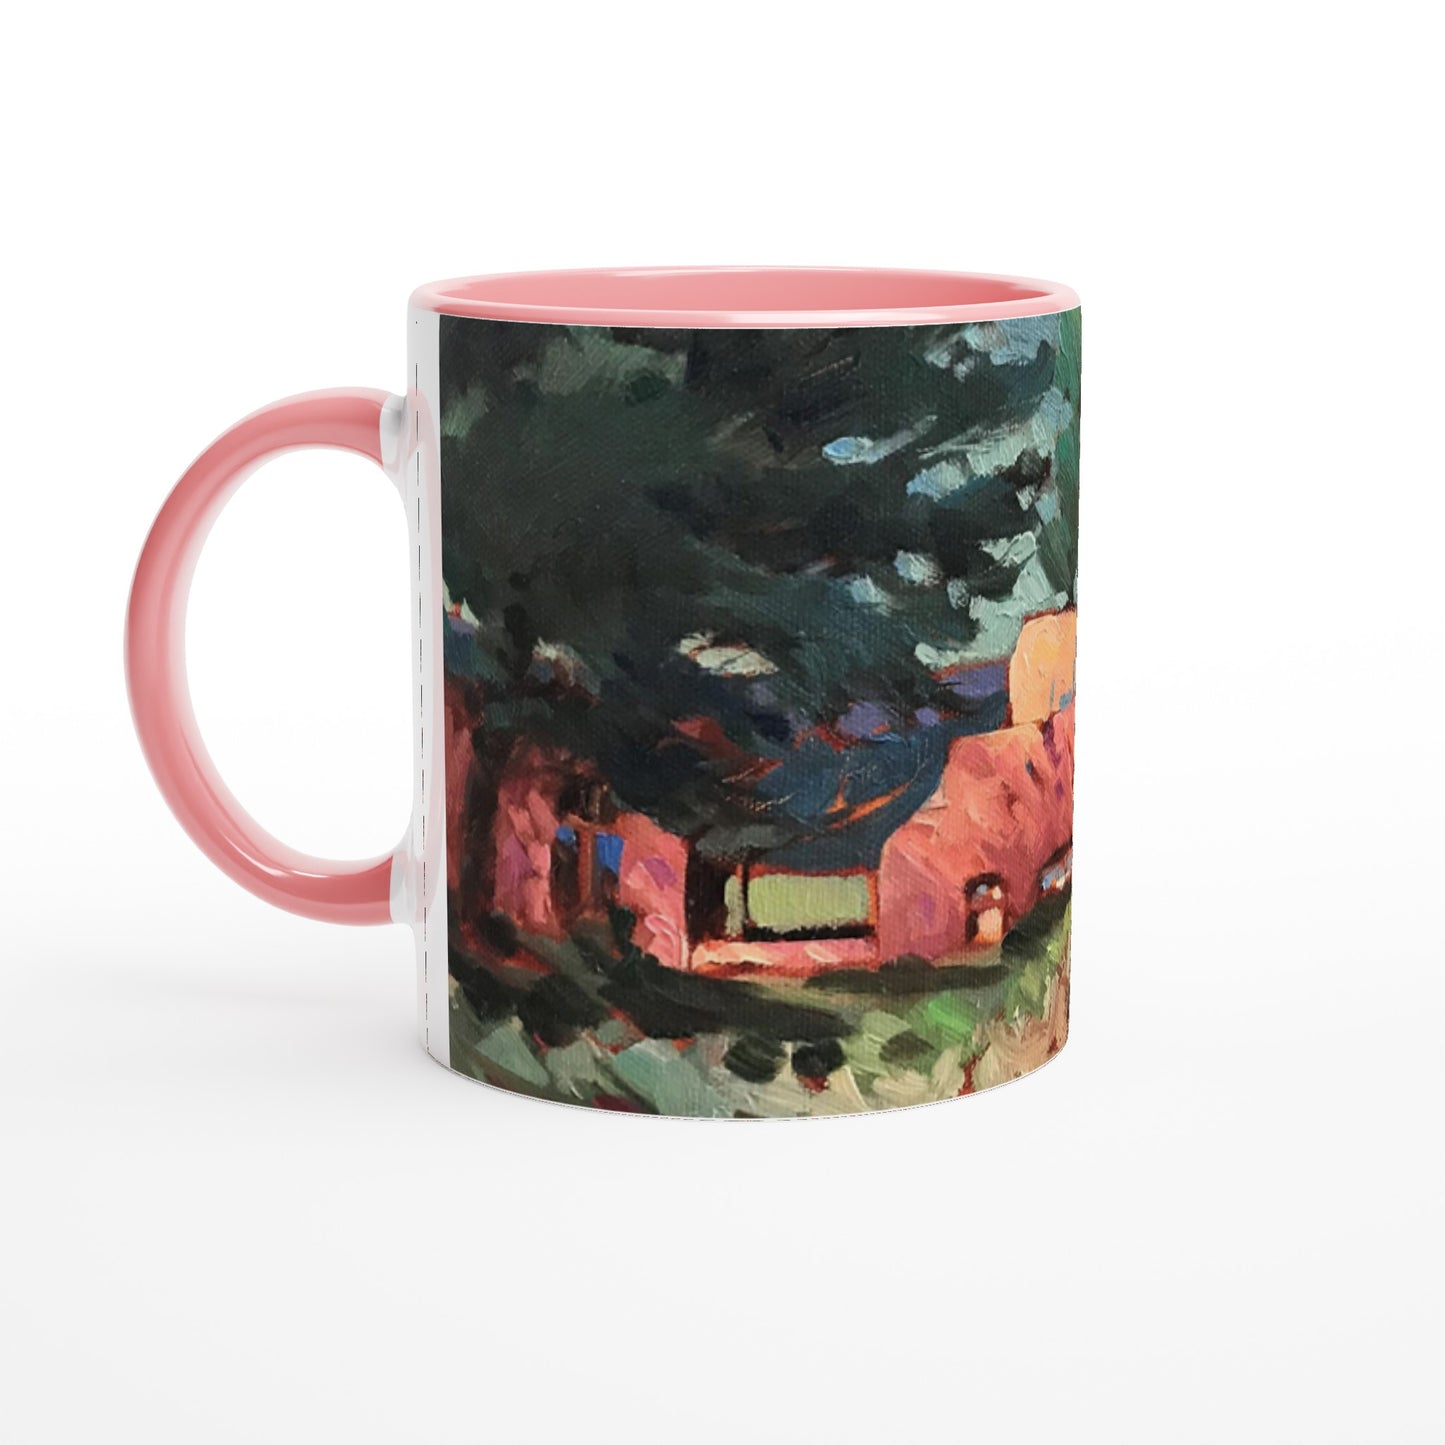 "Spring in Taos" White 11oz Ceramic Mug with Color Inside by Barbara Cleary Designs